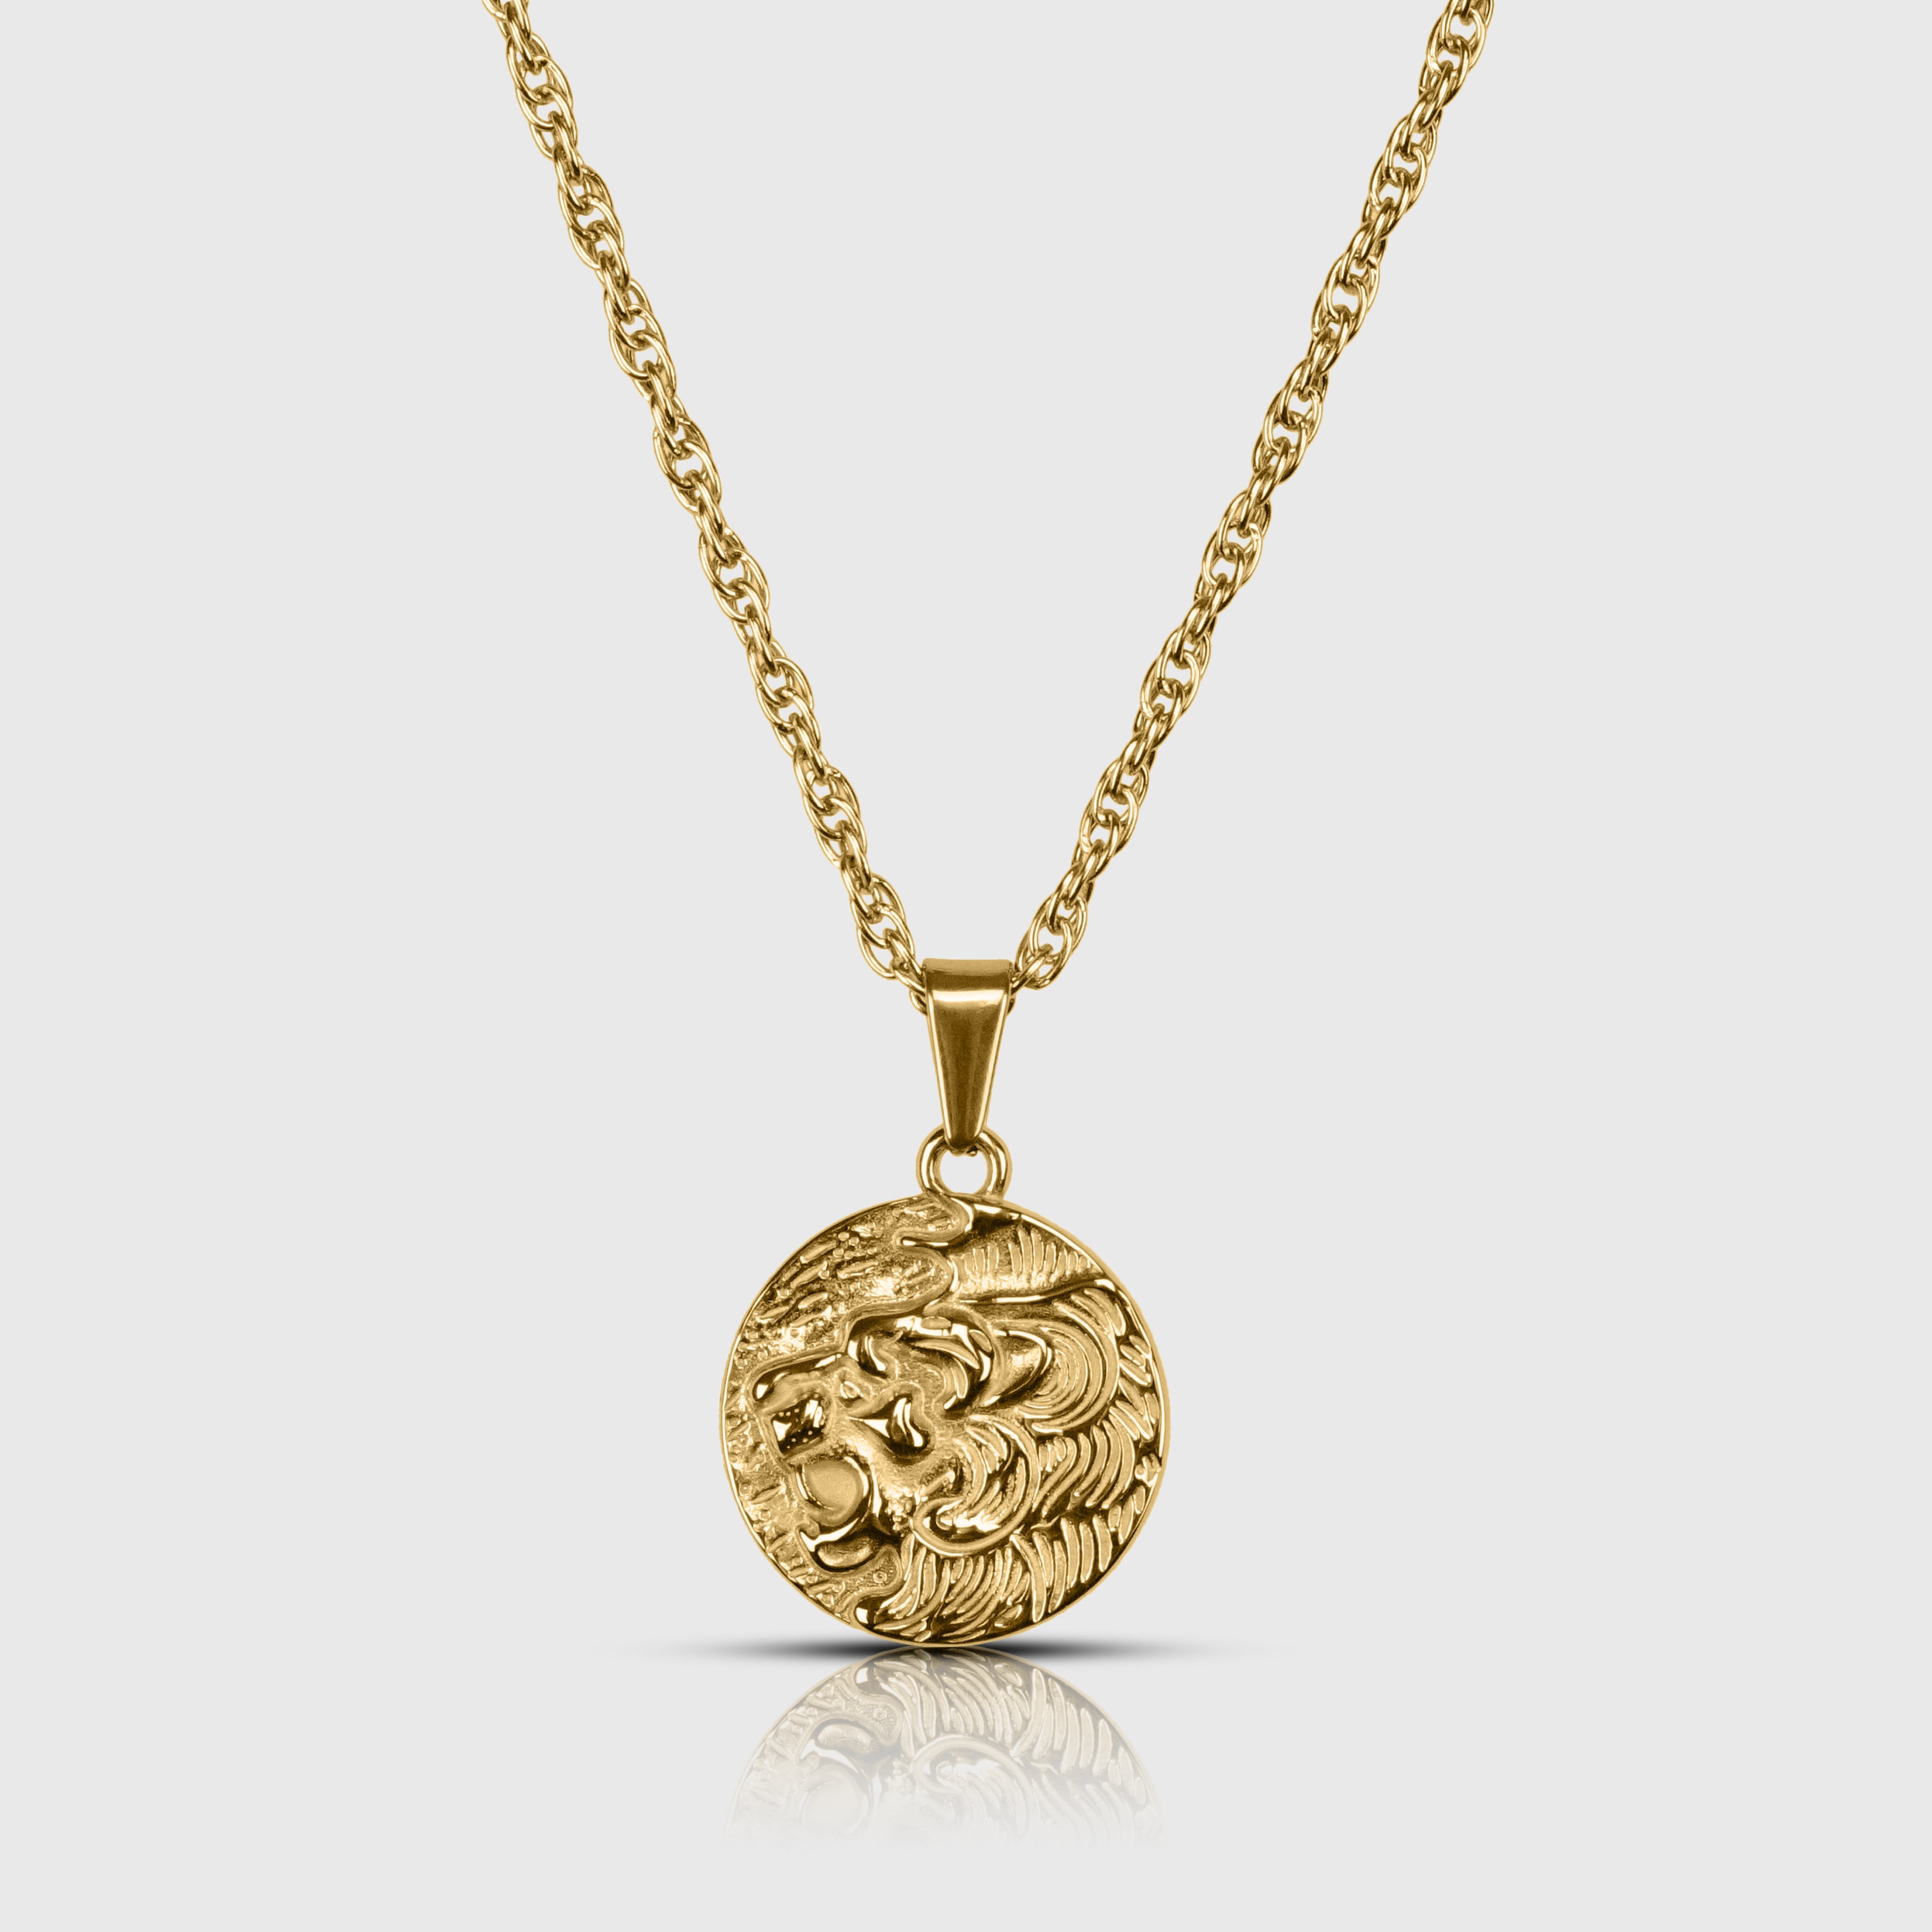 MAD LION NECKLACE - GOLD